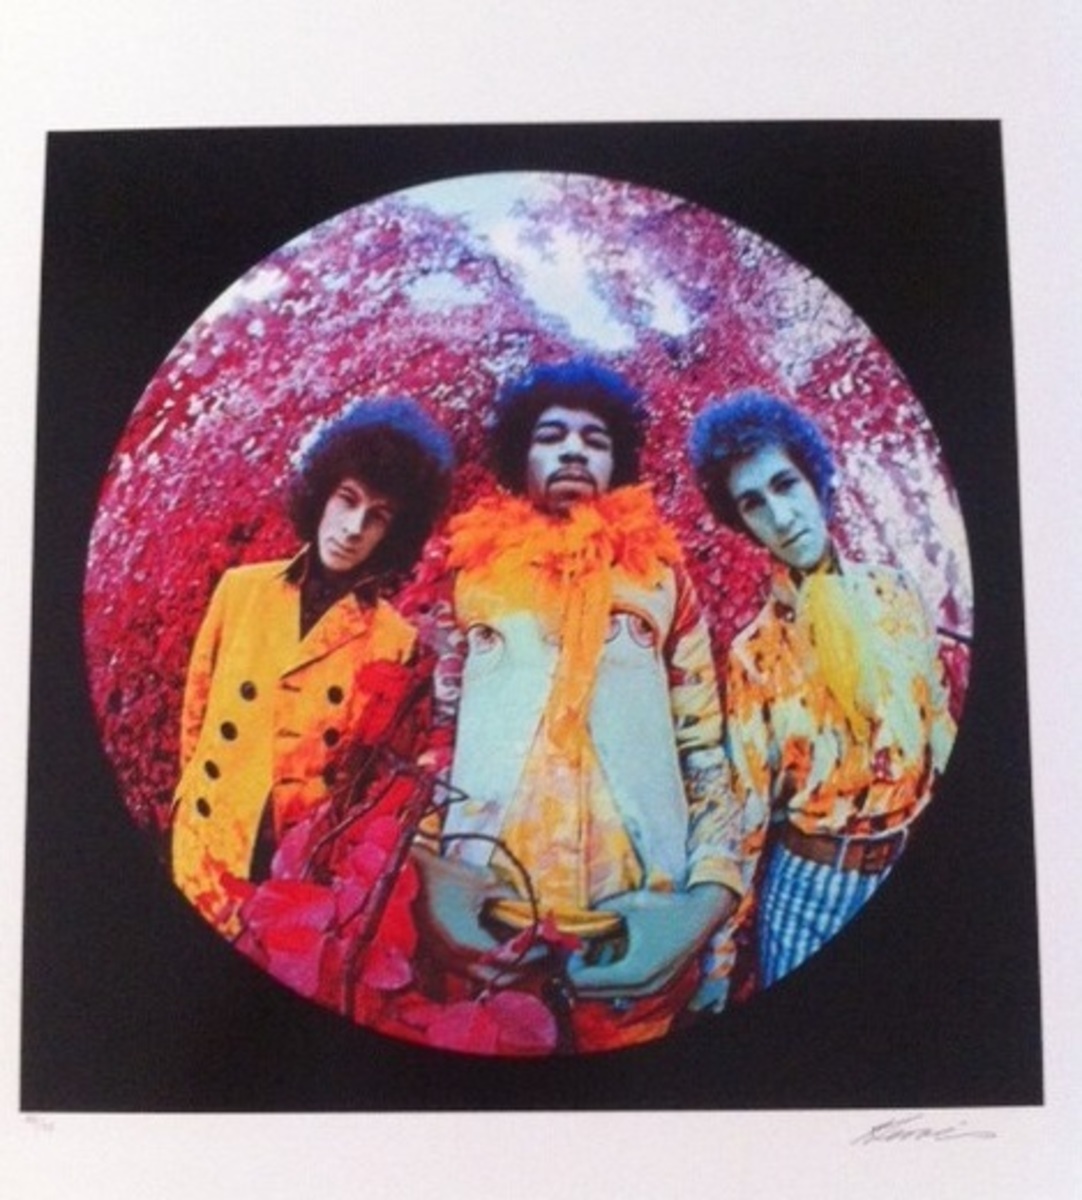 Jimi Hendrix - Are You Experienced Limited Edition Art-Print by Karl Ferris